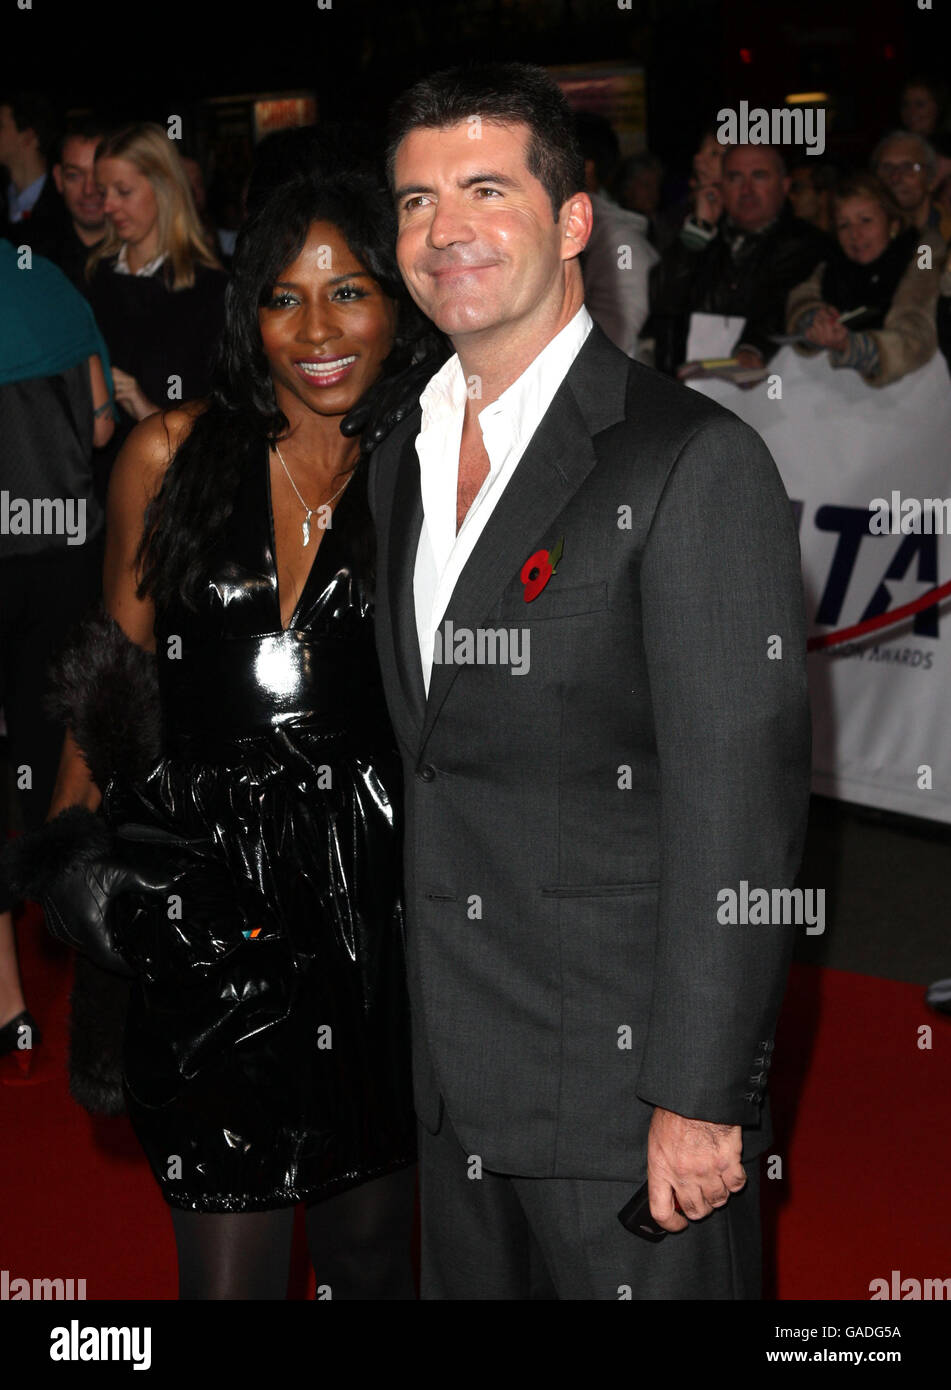 Sinitta and Simon Cowell arriving for the 2007 National Television Awards (NTA's) at the Royal Albert Hall, west London. Stock Photo